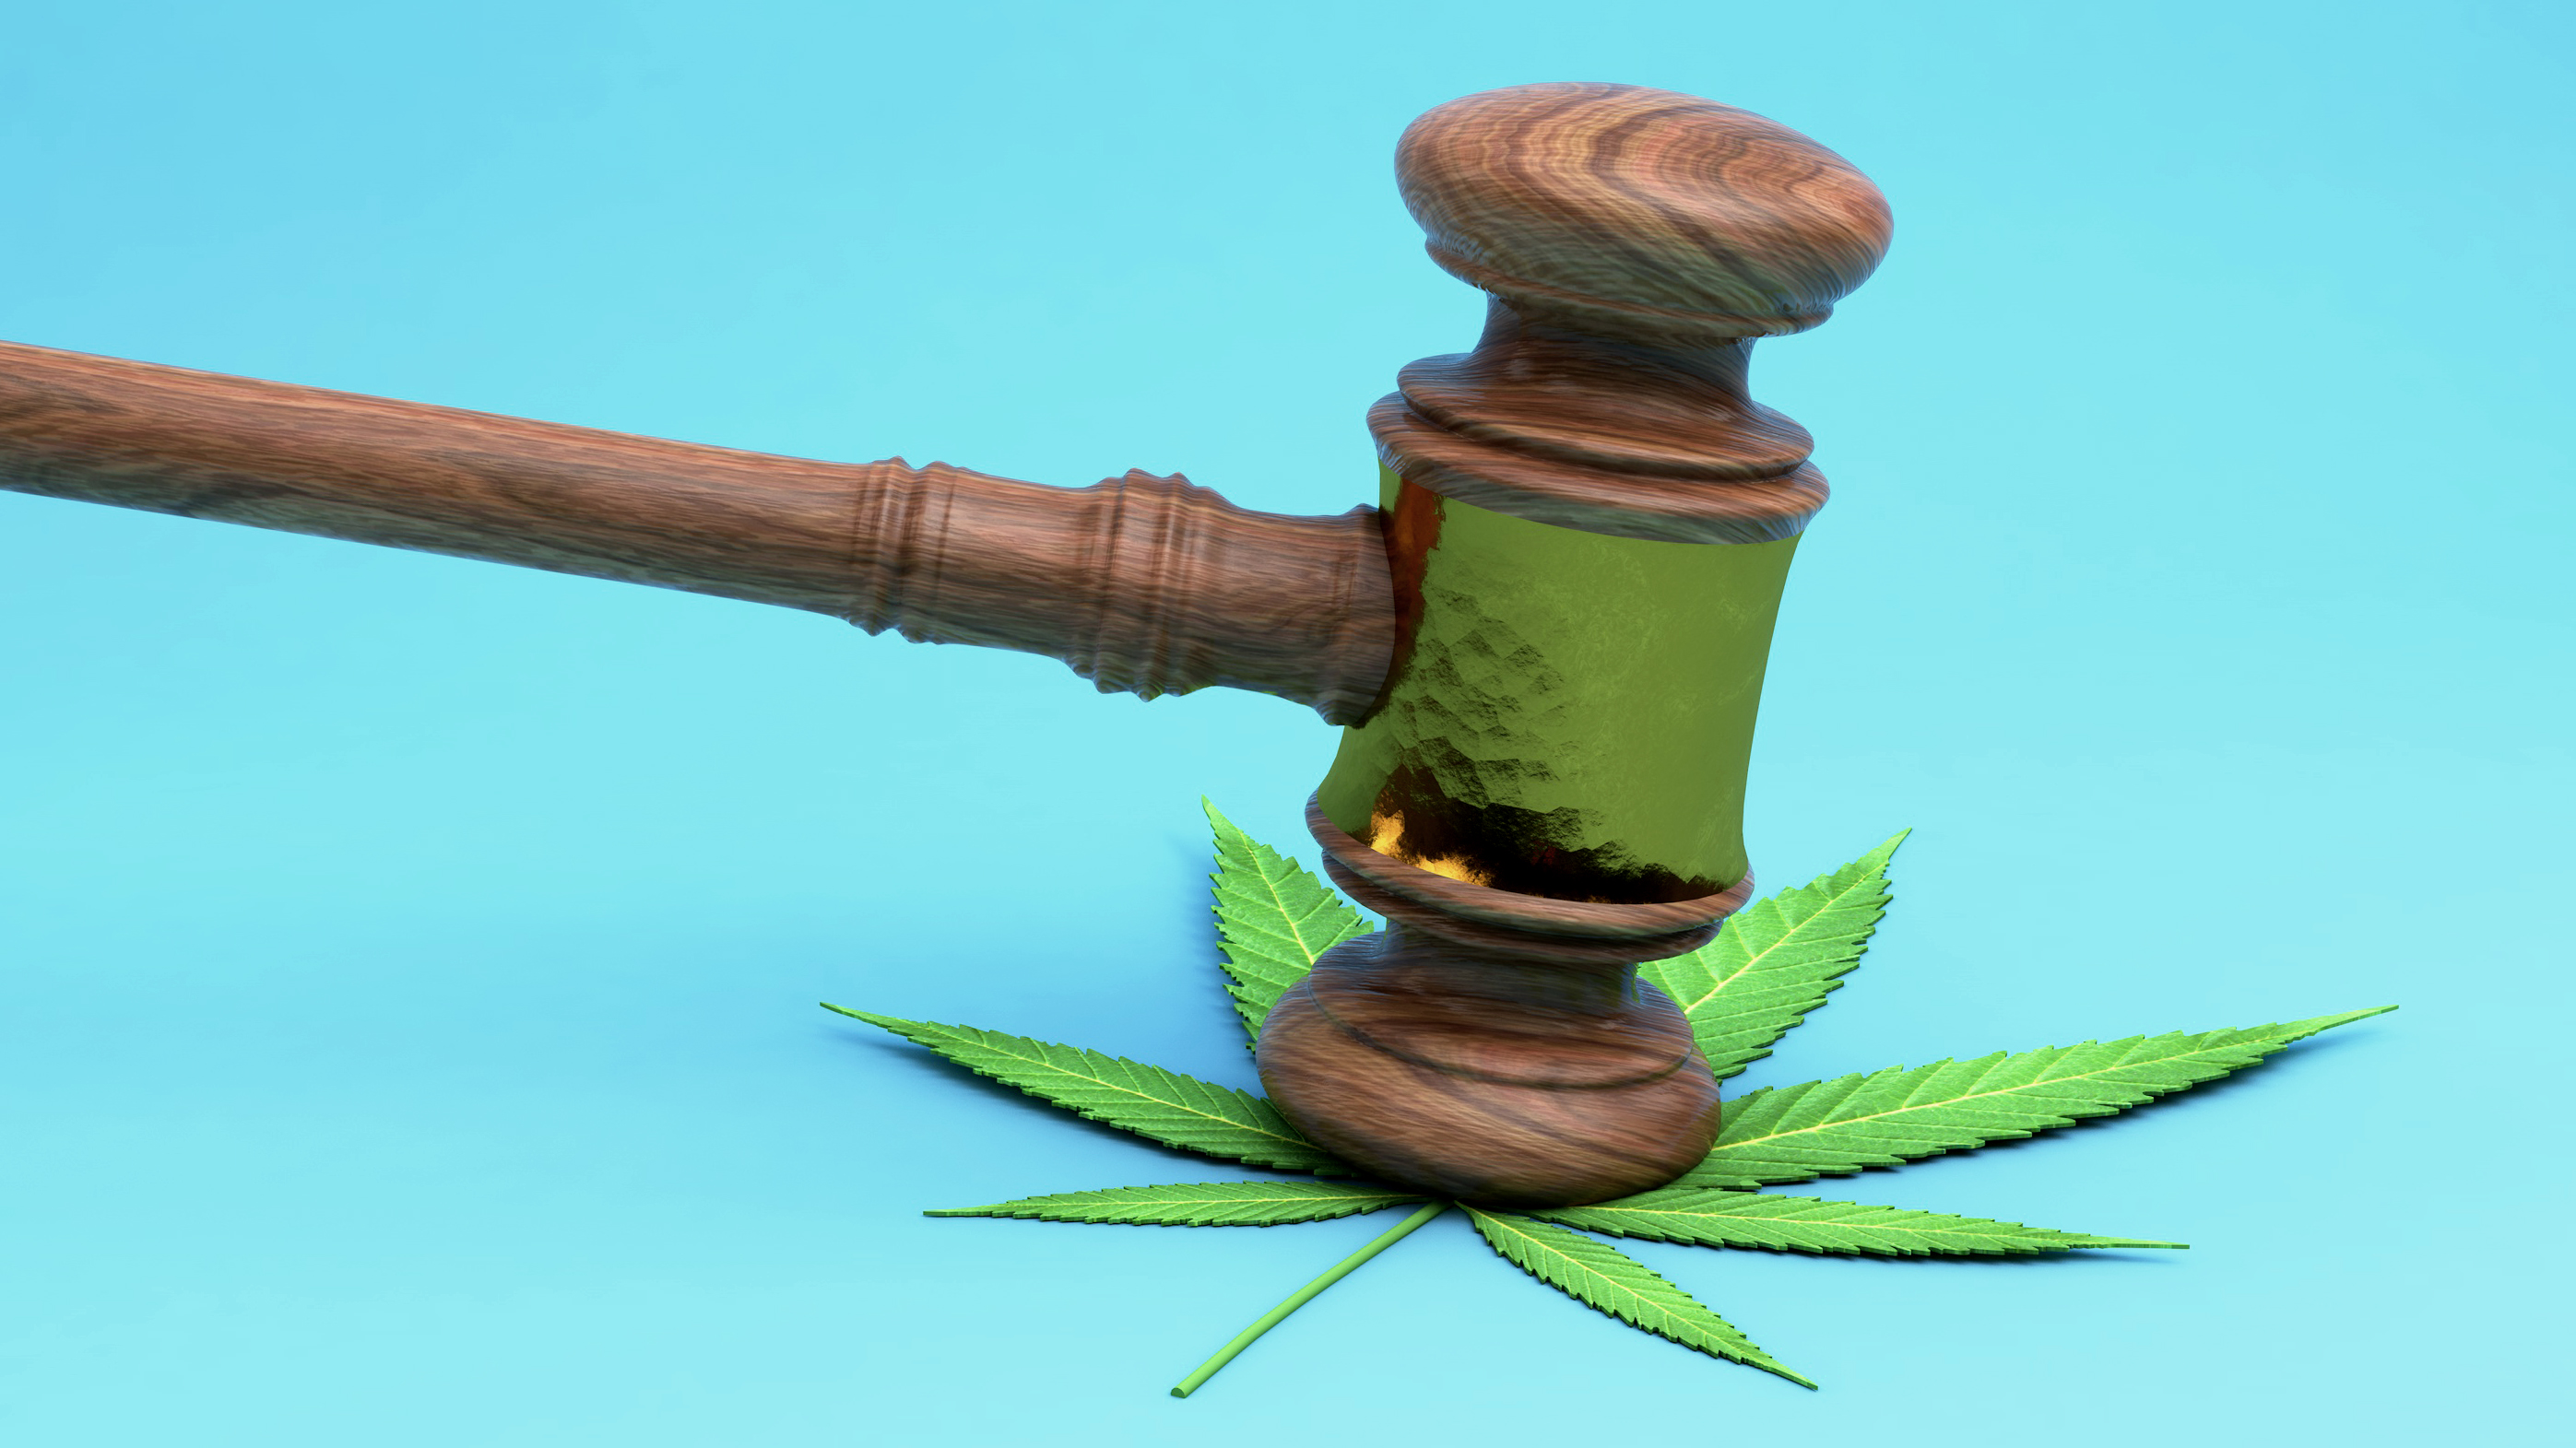 Illustration showing a judge’s gavel coming down on a cannabis leaf.